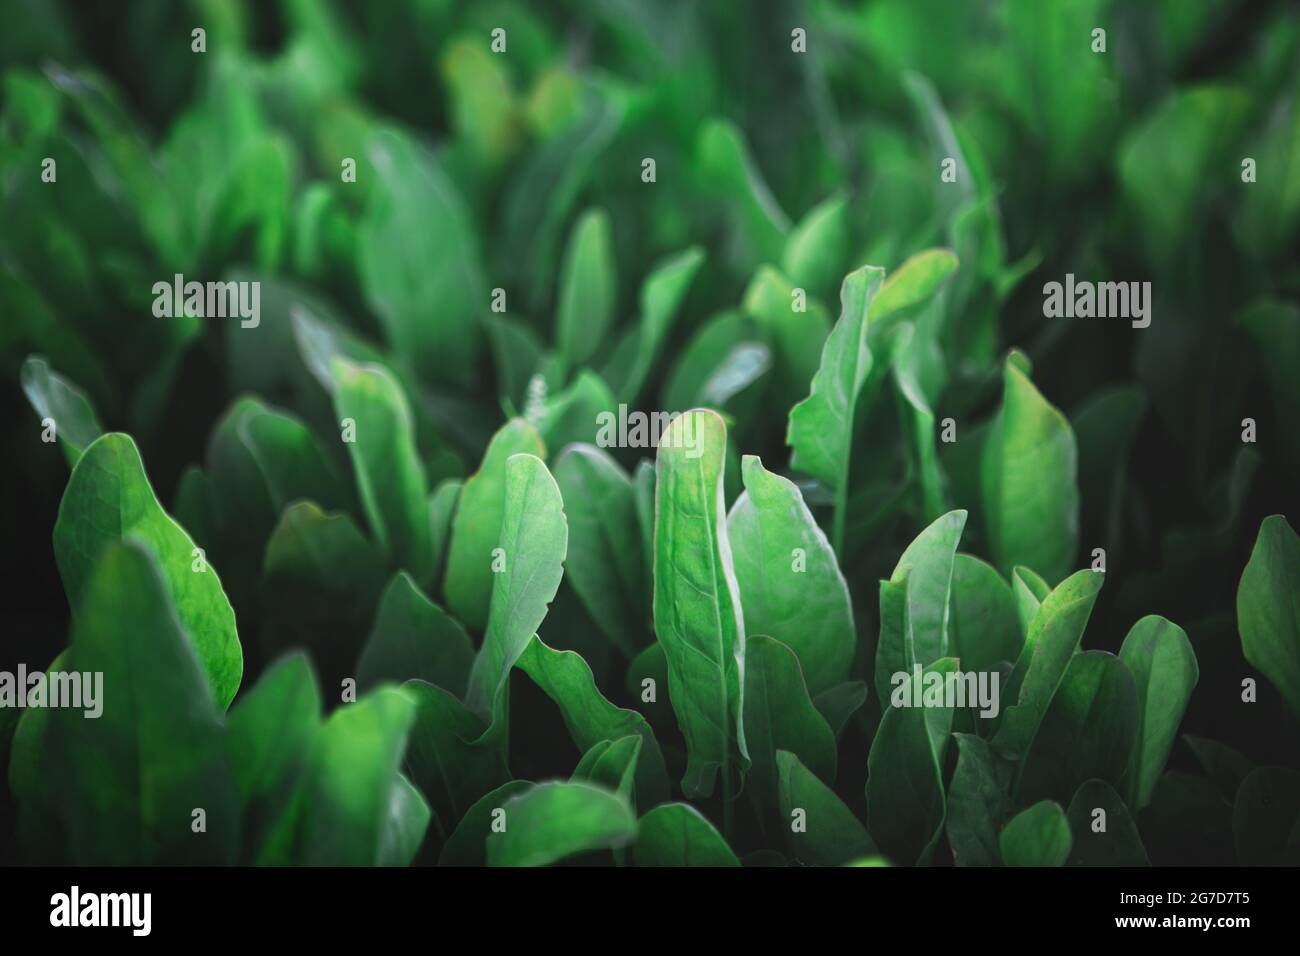 Closeup of rows of organic healthy green sorrel, spinach plants Stock Photo